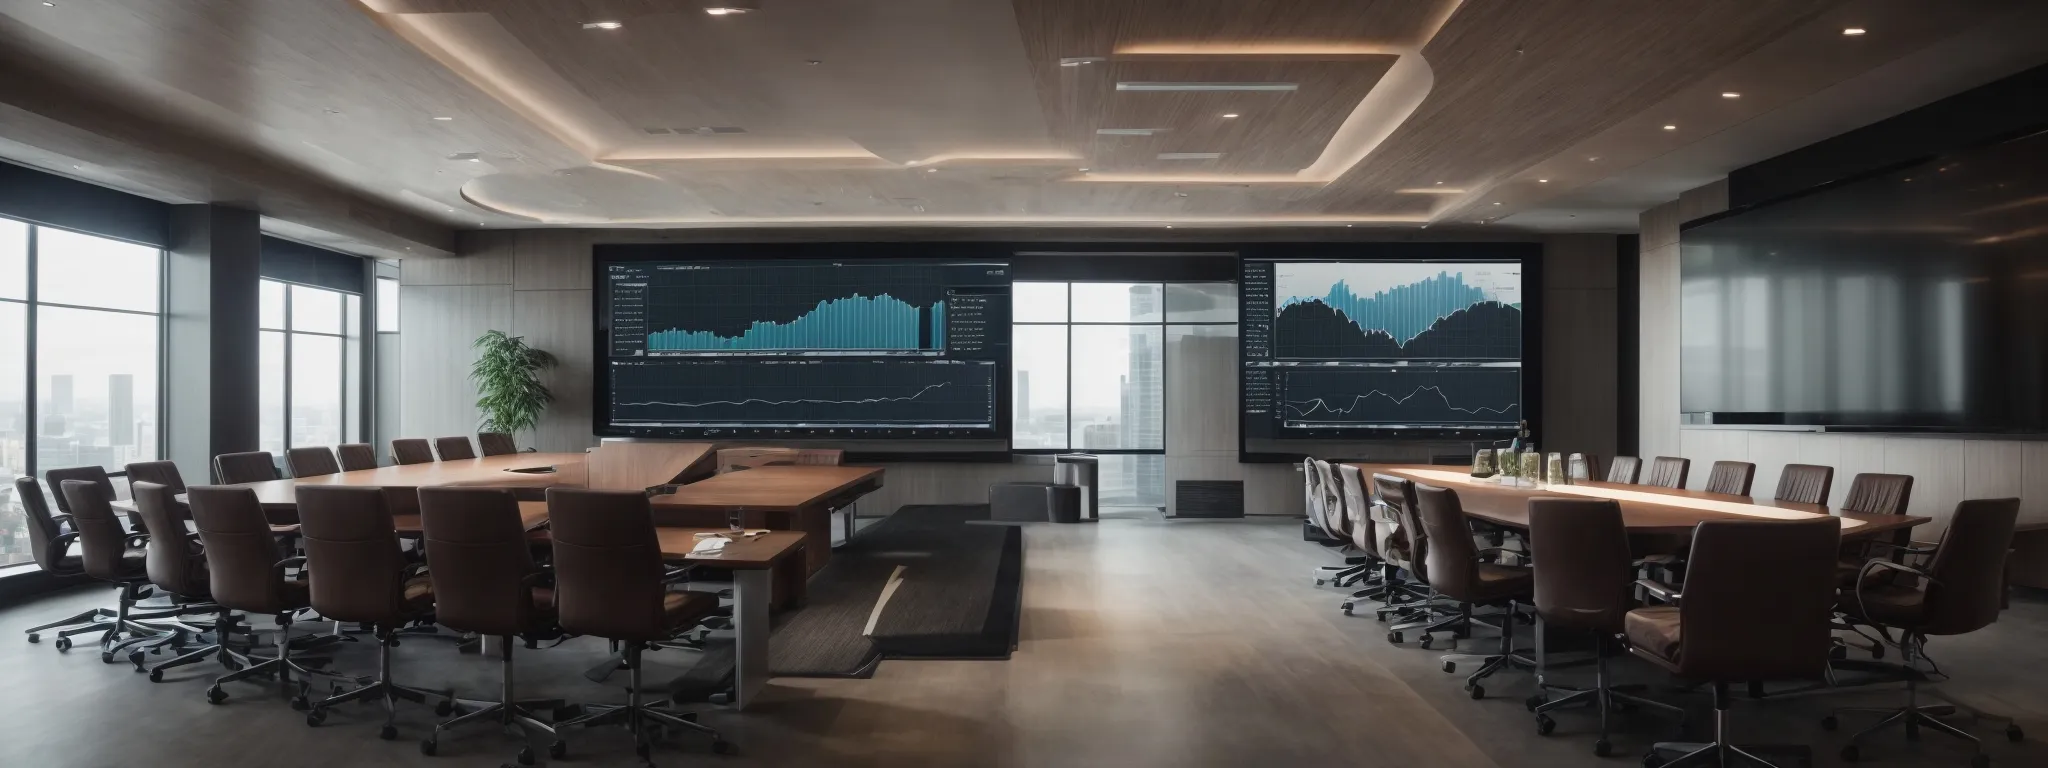 a modern, comfortable conference room with a large digital screen displaying graphs, symbolizing innovative business strategy sessions.